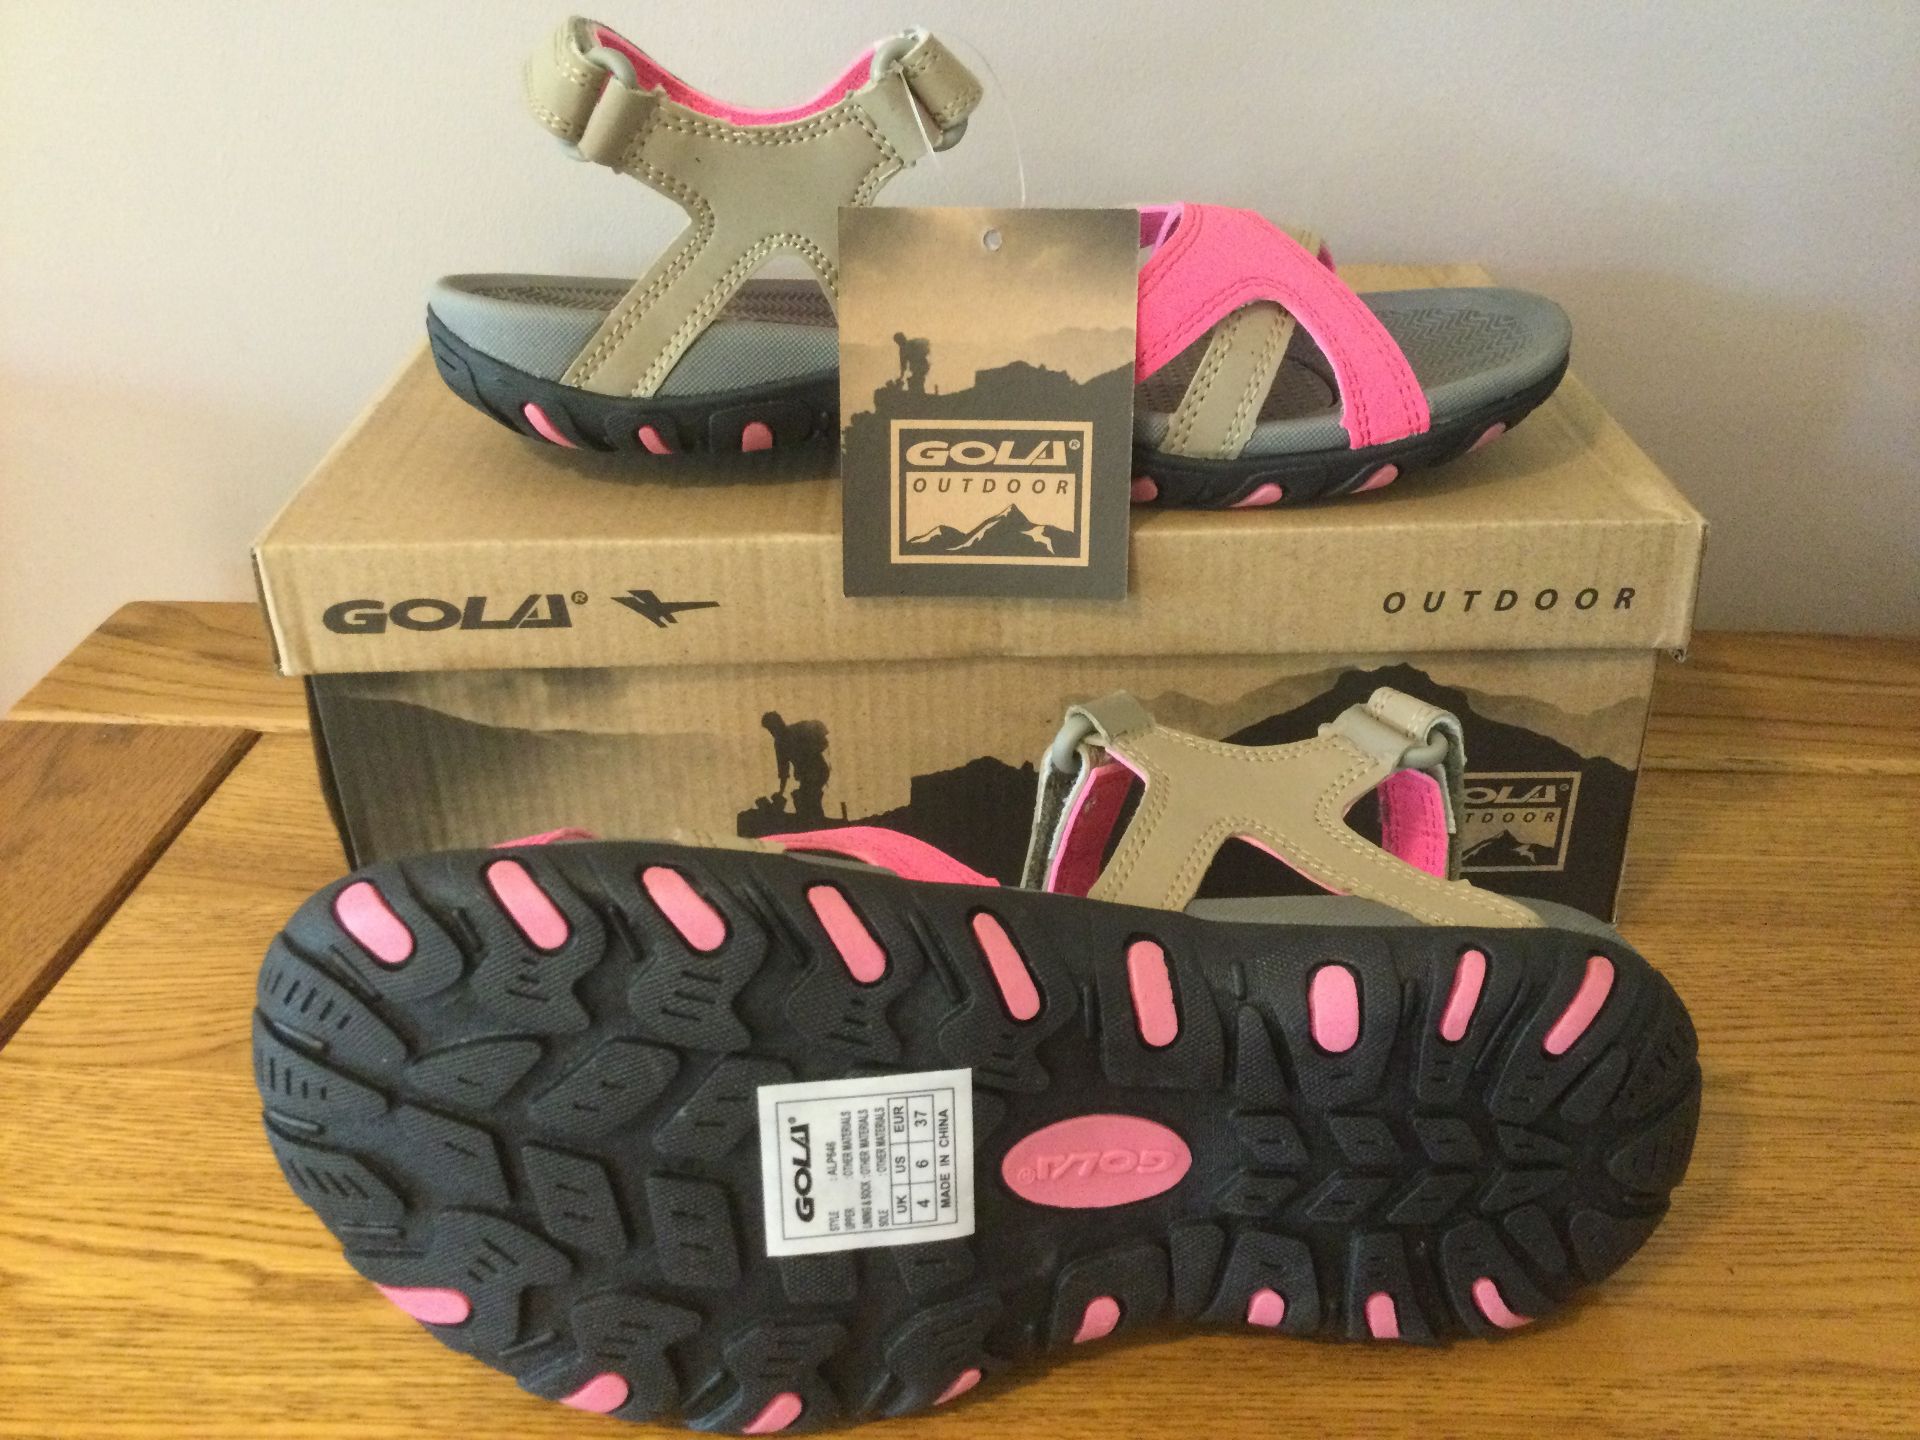 Gola Women's “Cedar” Hiking Sandals, Taupe/Hot Pink, Size 4 - Brand New - Image 3 of 4